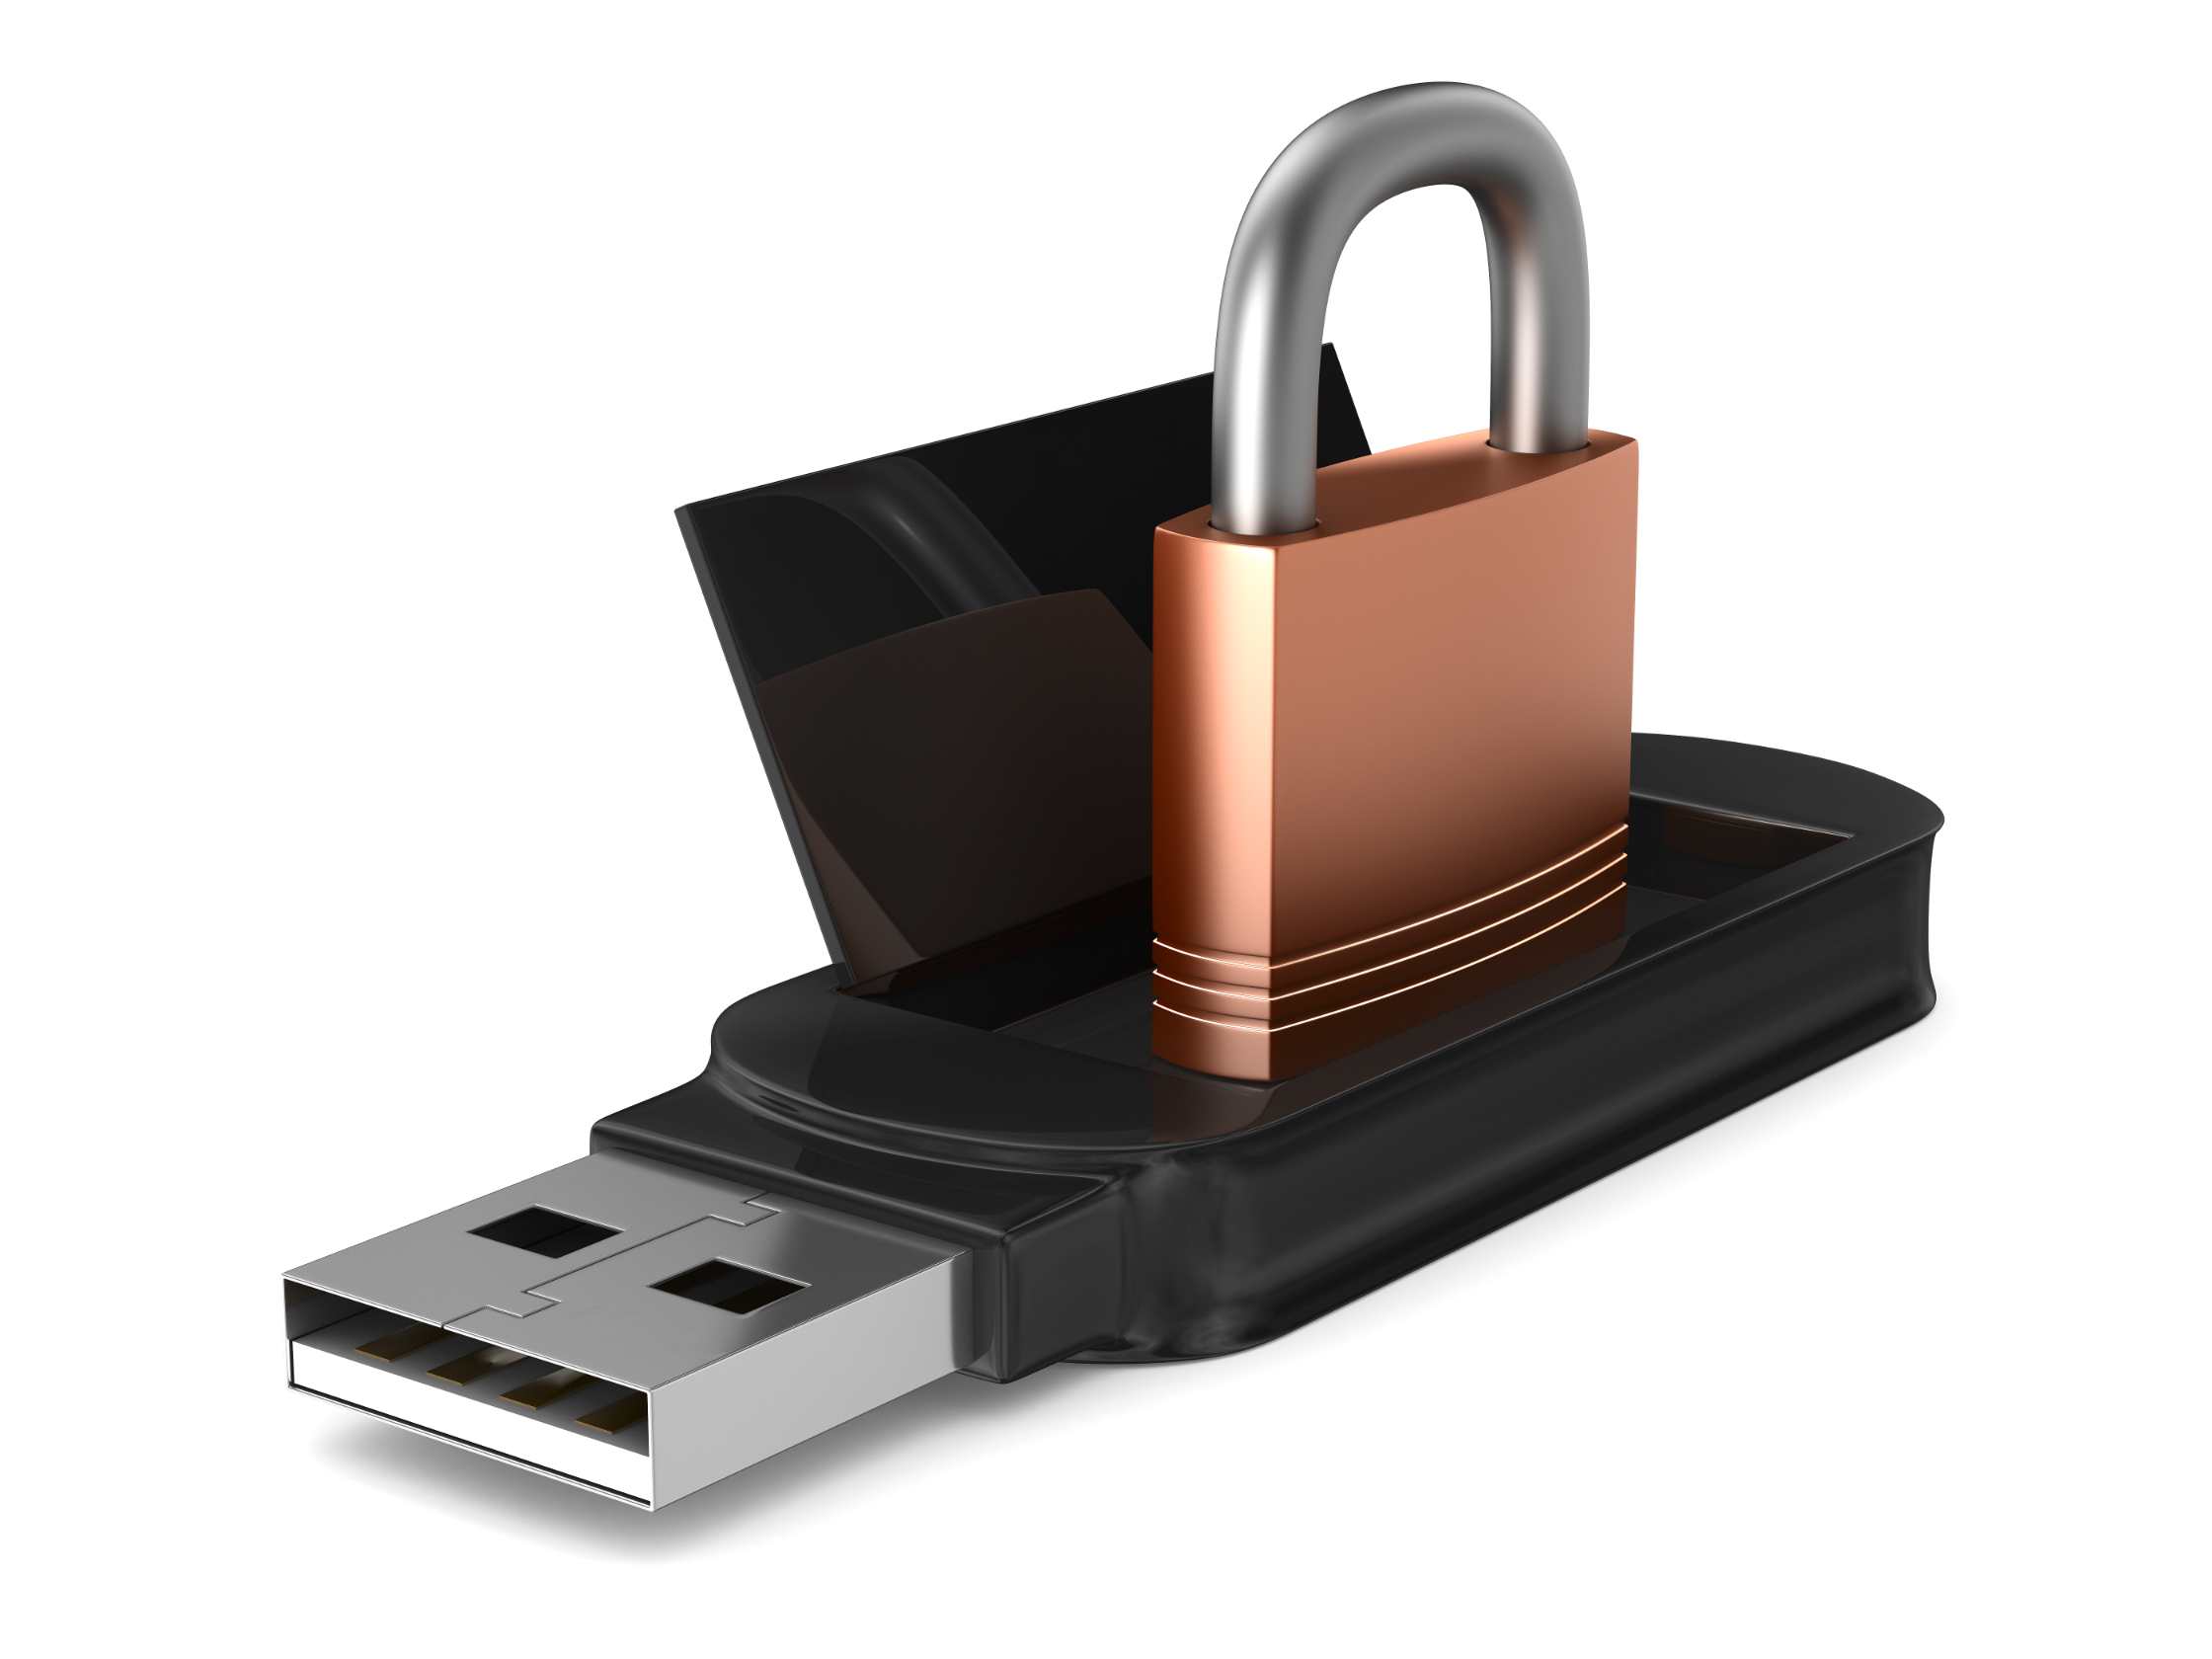 lock on a hard drive graphic